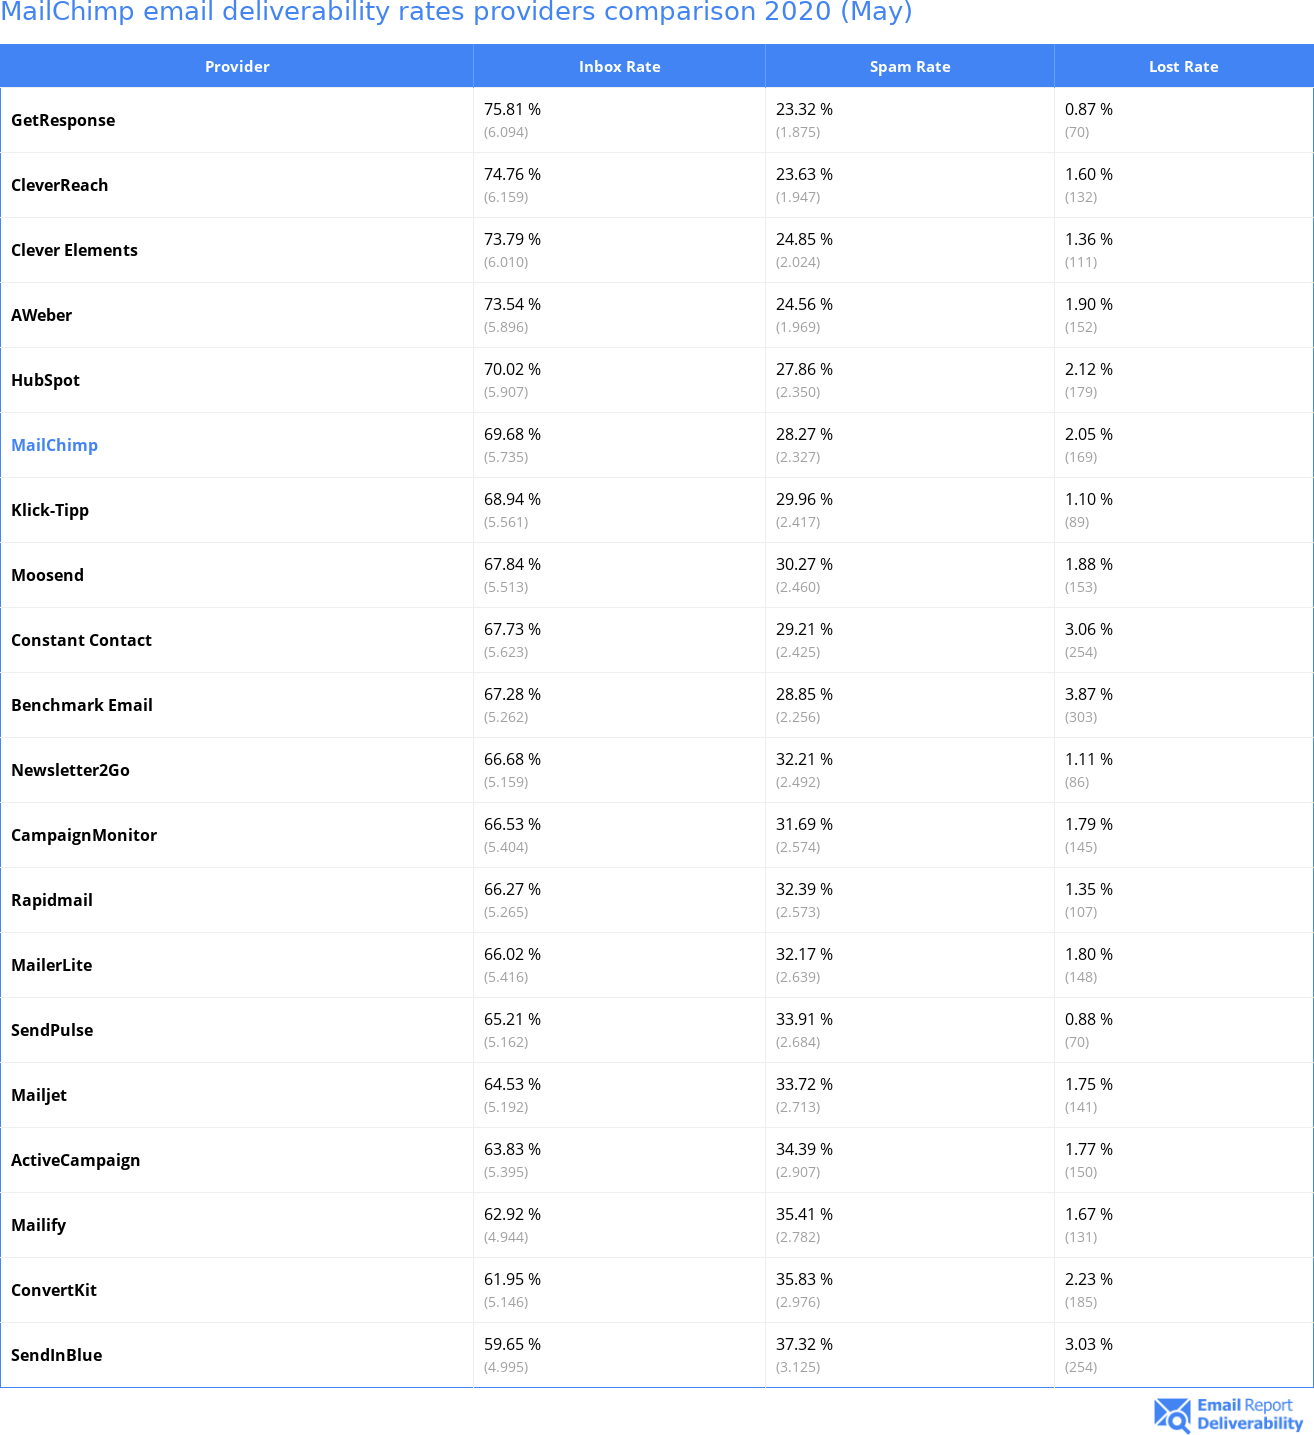 MailChimp email deliverability rates providers comparison 2020 (May)